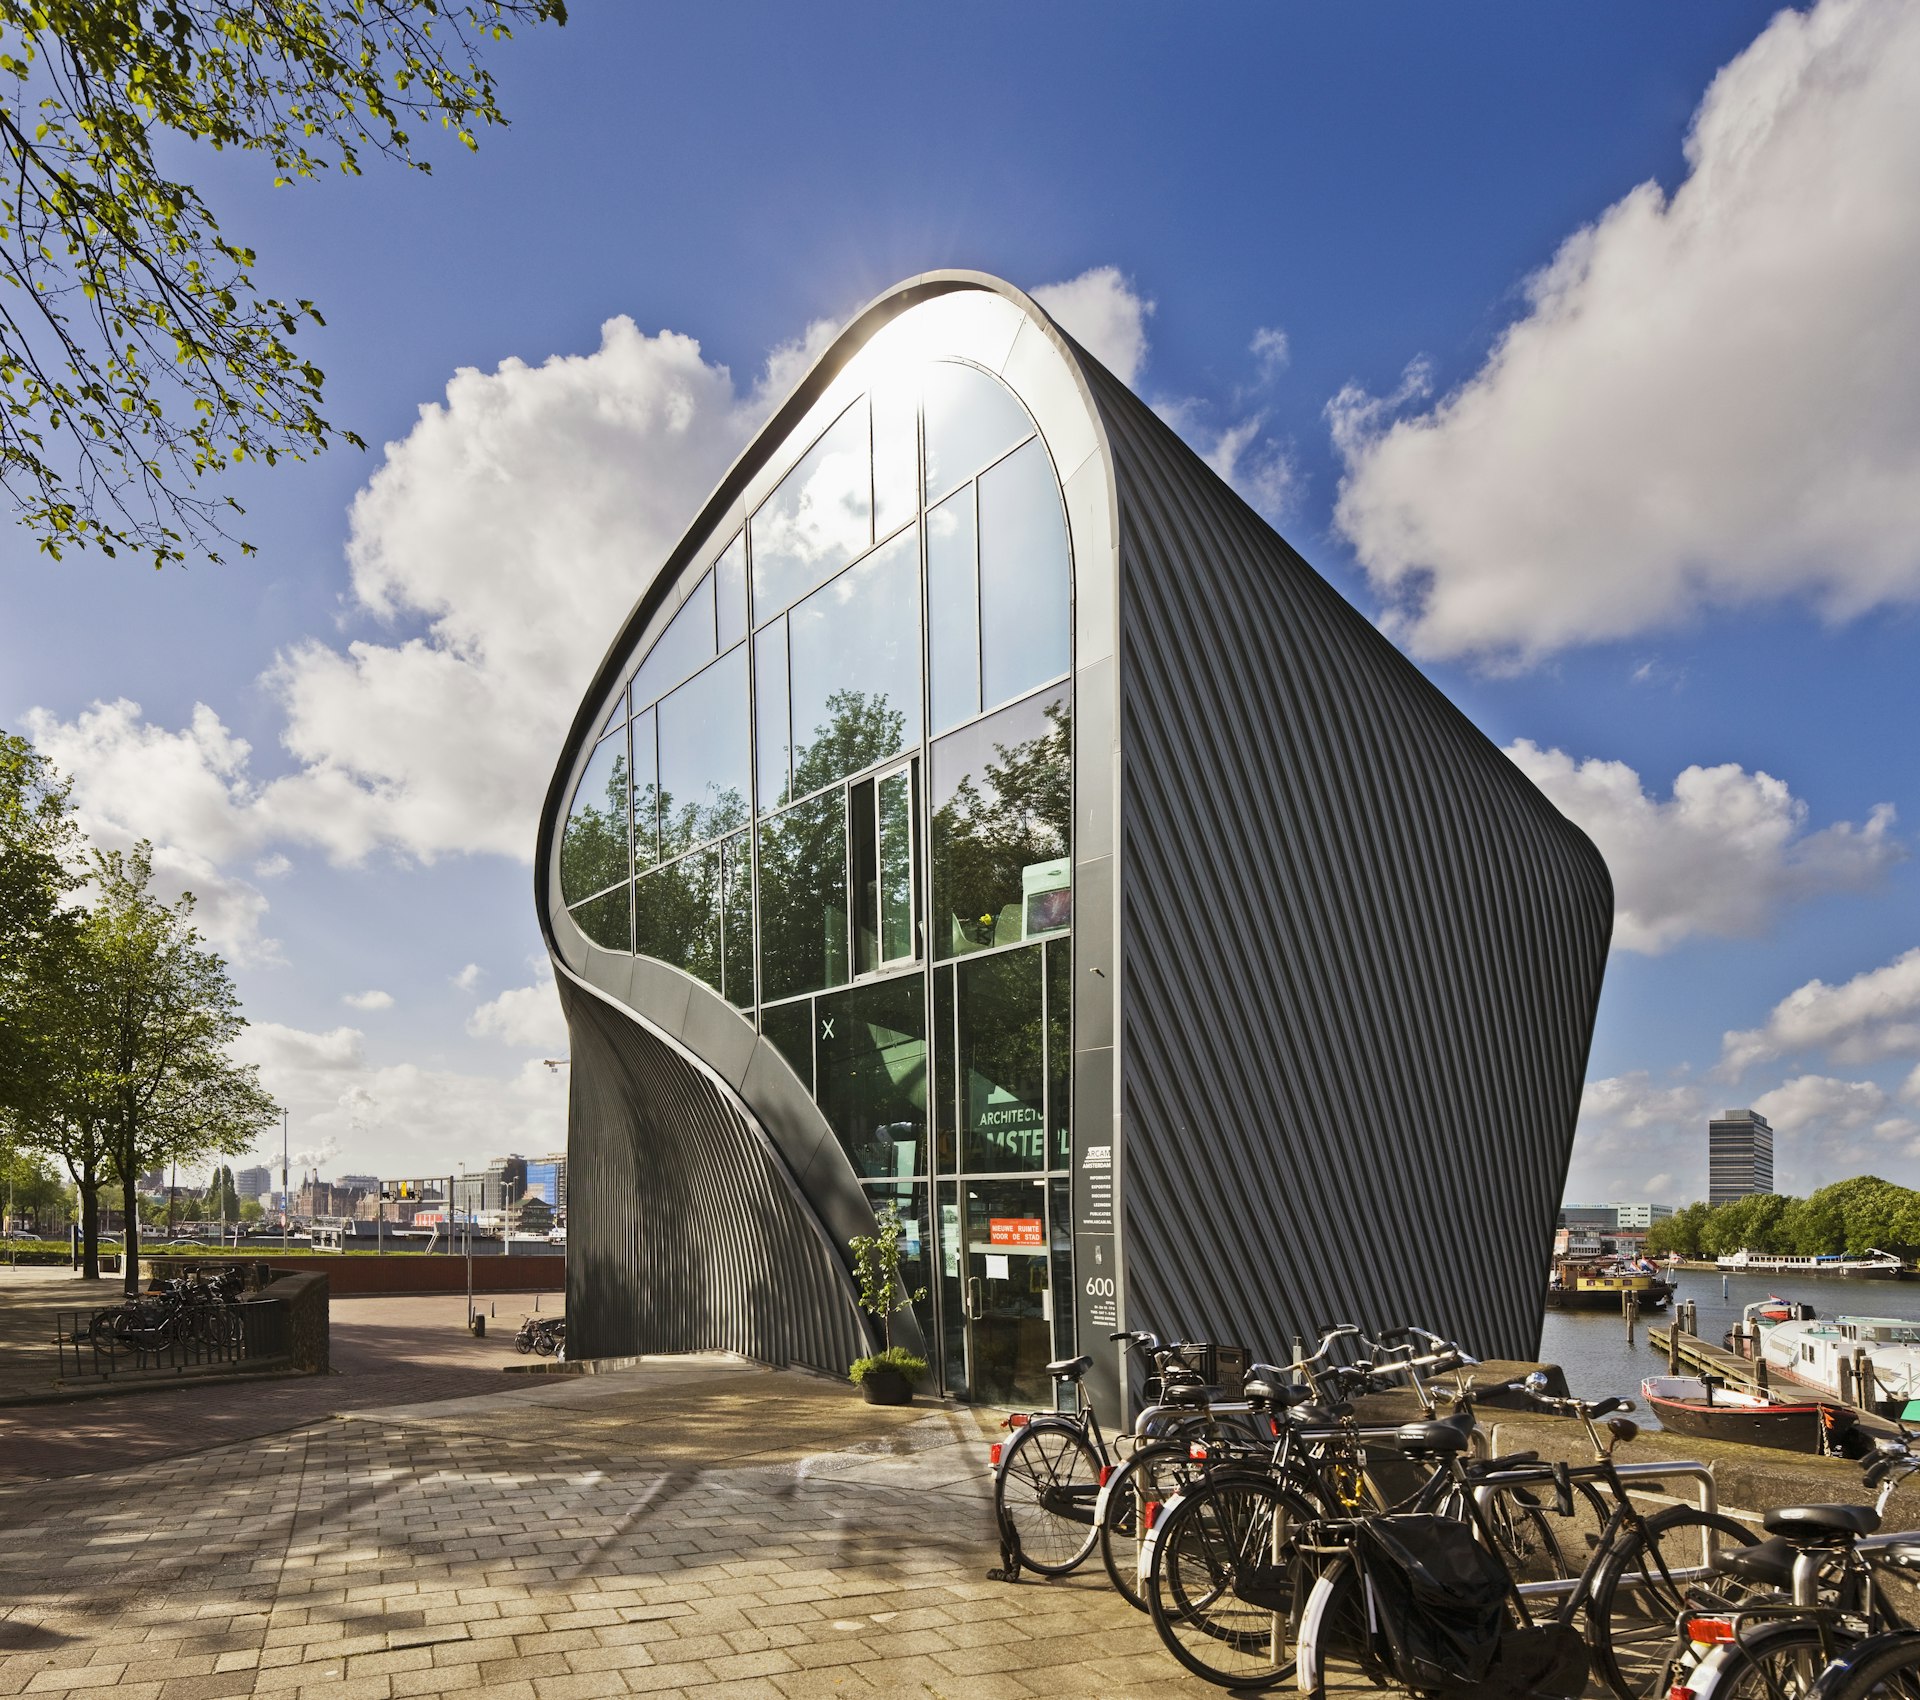 A contemporary curved glass-and-steel building on the edge of a dock